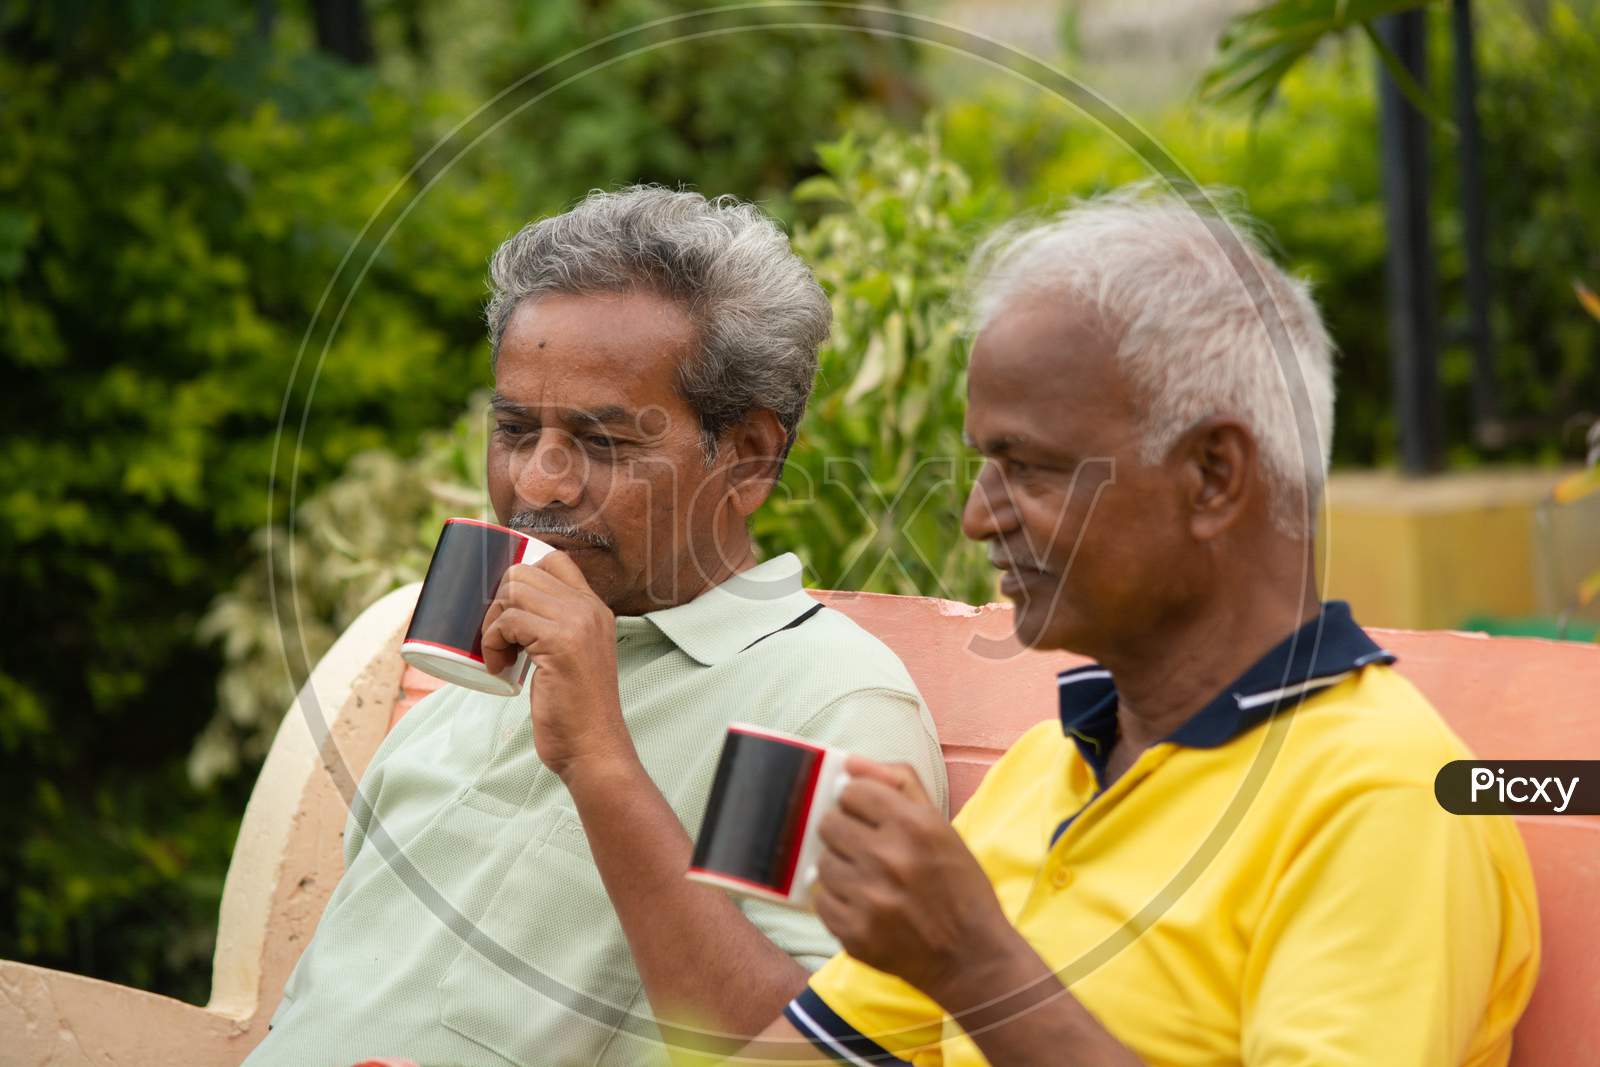 A Couple Of Elderly Man Or Old Men's having Tea or Coffee At Outdoors